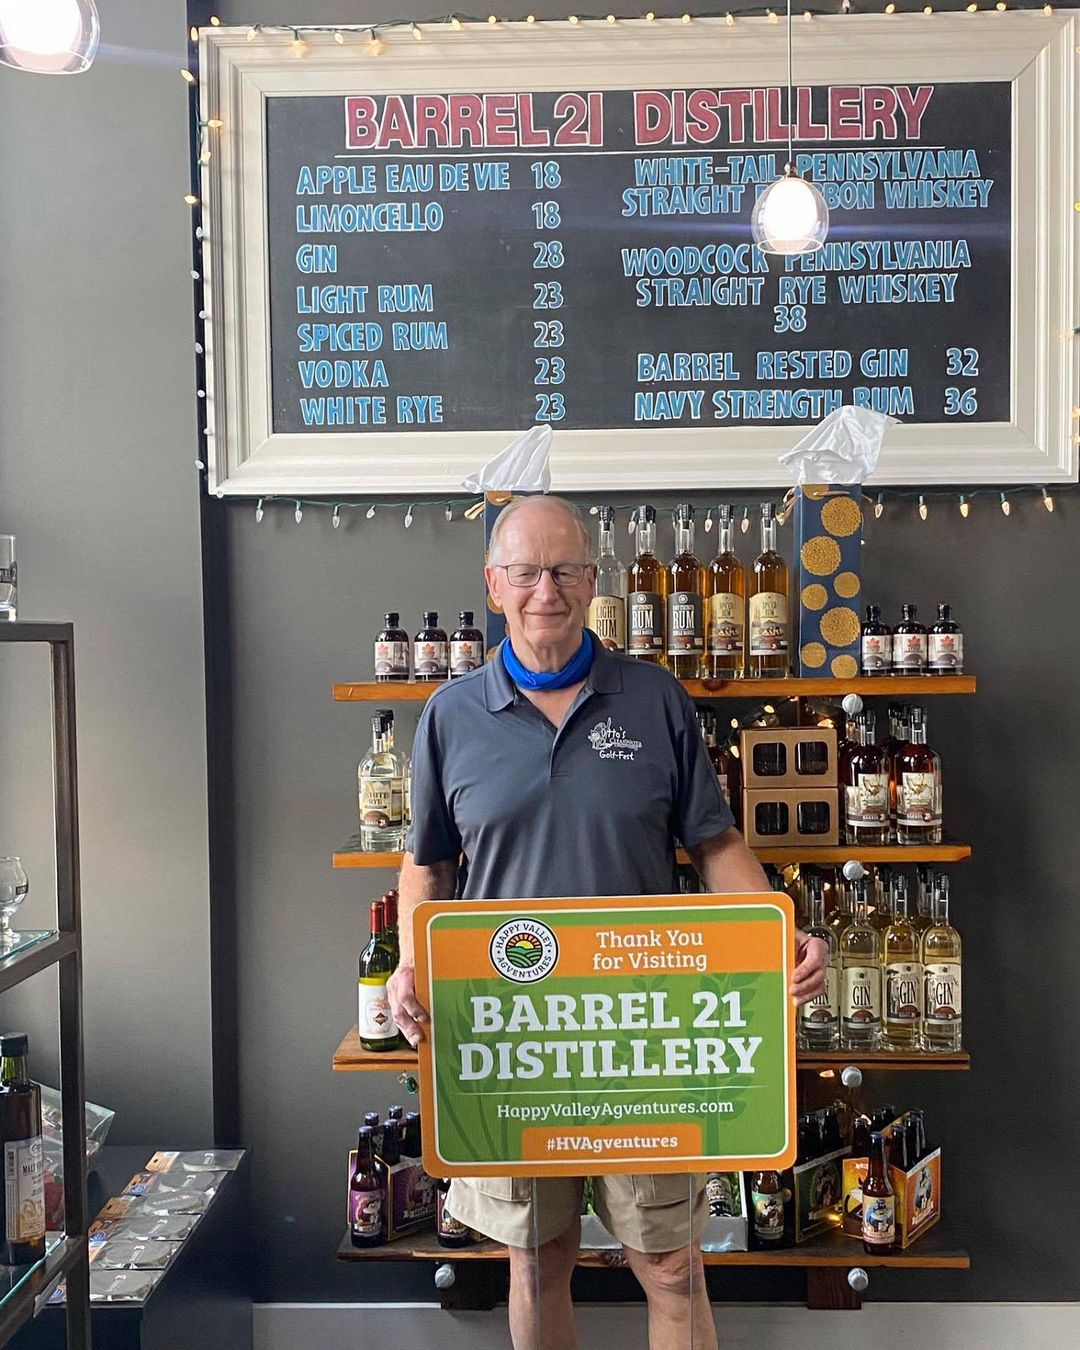 @barrel21distillery offers a unique distillery experience featuring their spirits and beer made on site. Barrel 21's seasonal menus celebrate local resources and blend classic dishes with current trends, including weekly features and local ingredients. Be